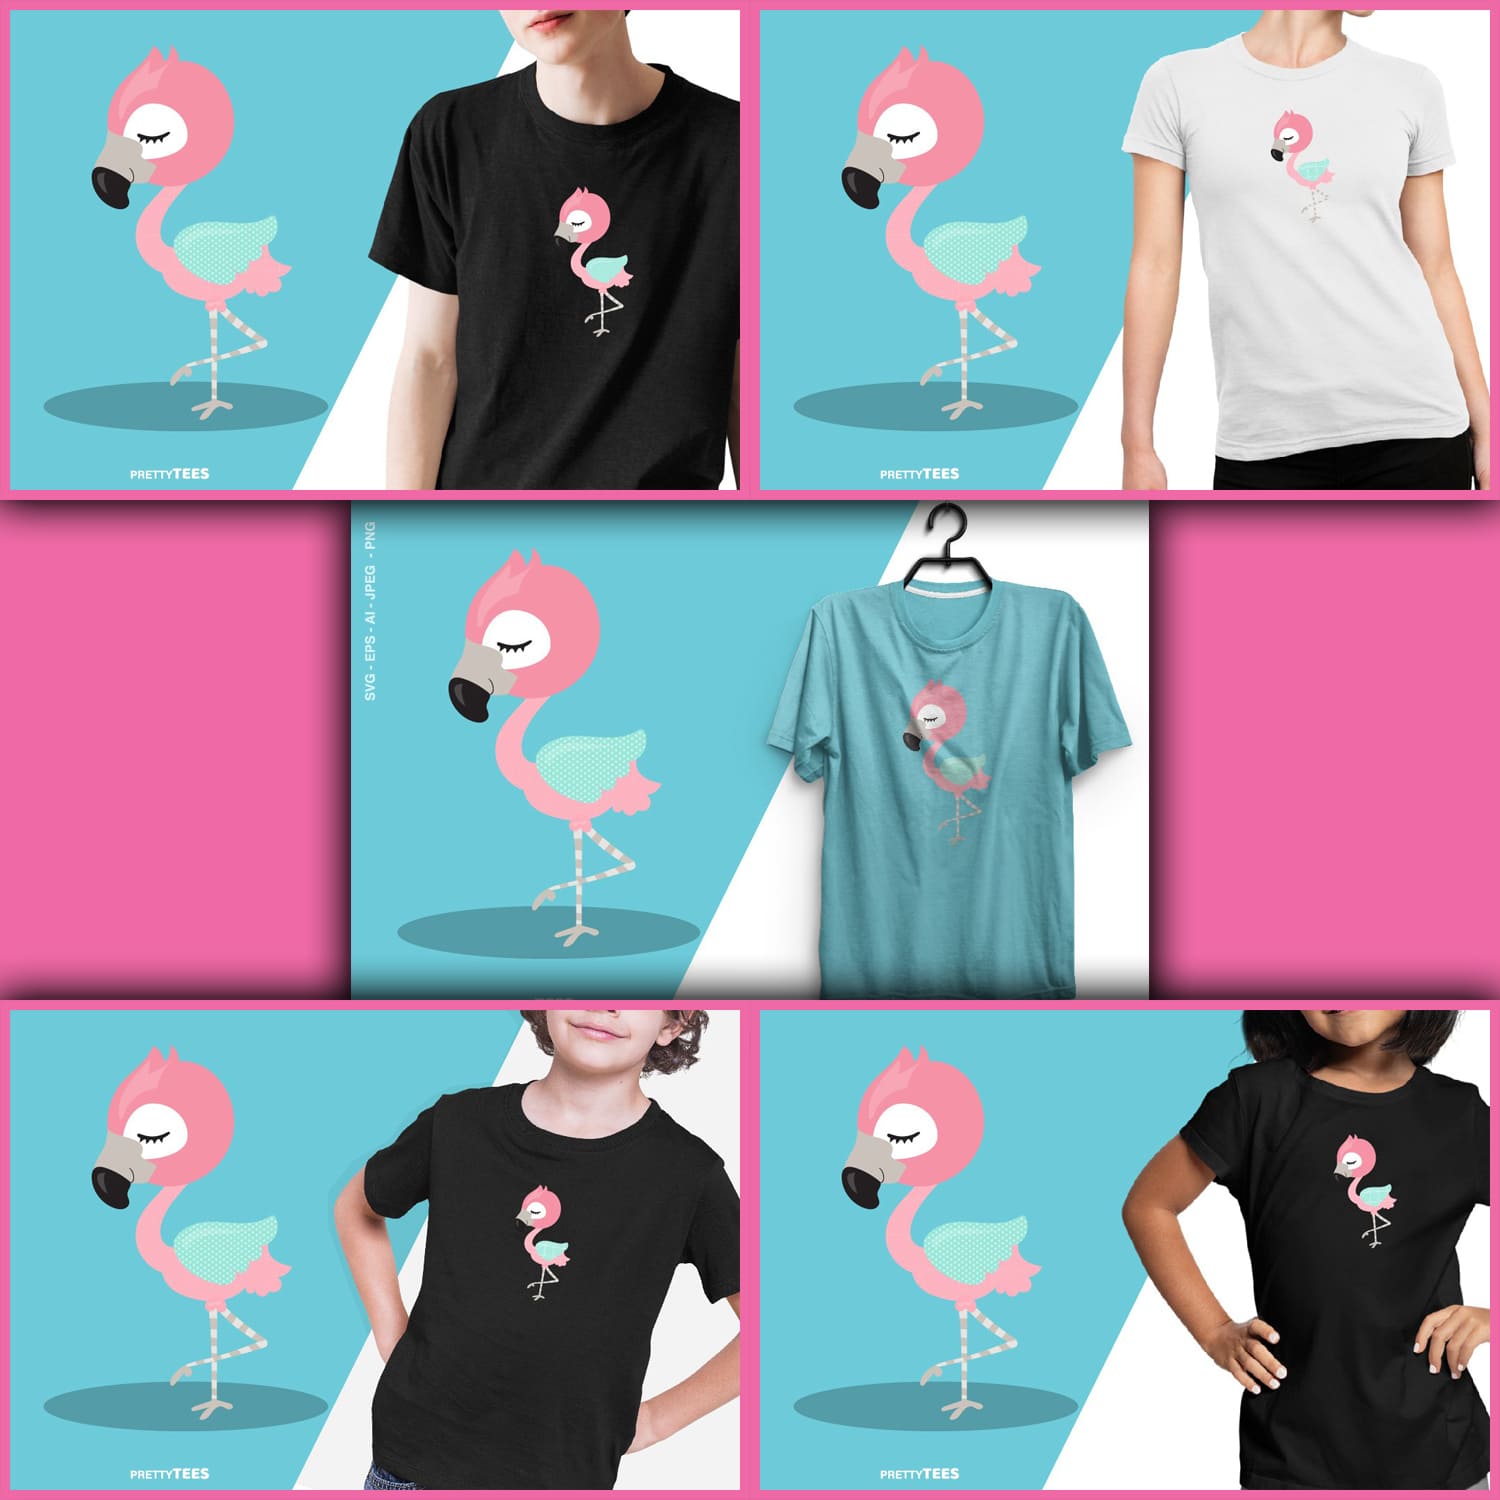 Colored t-shirts with the image of a flamingo.